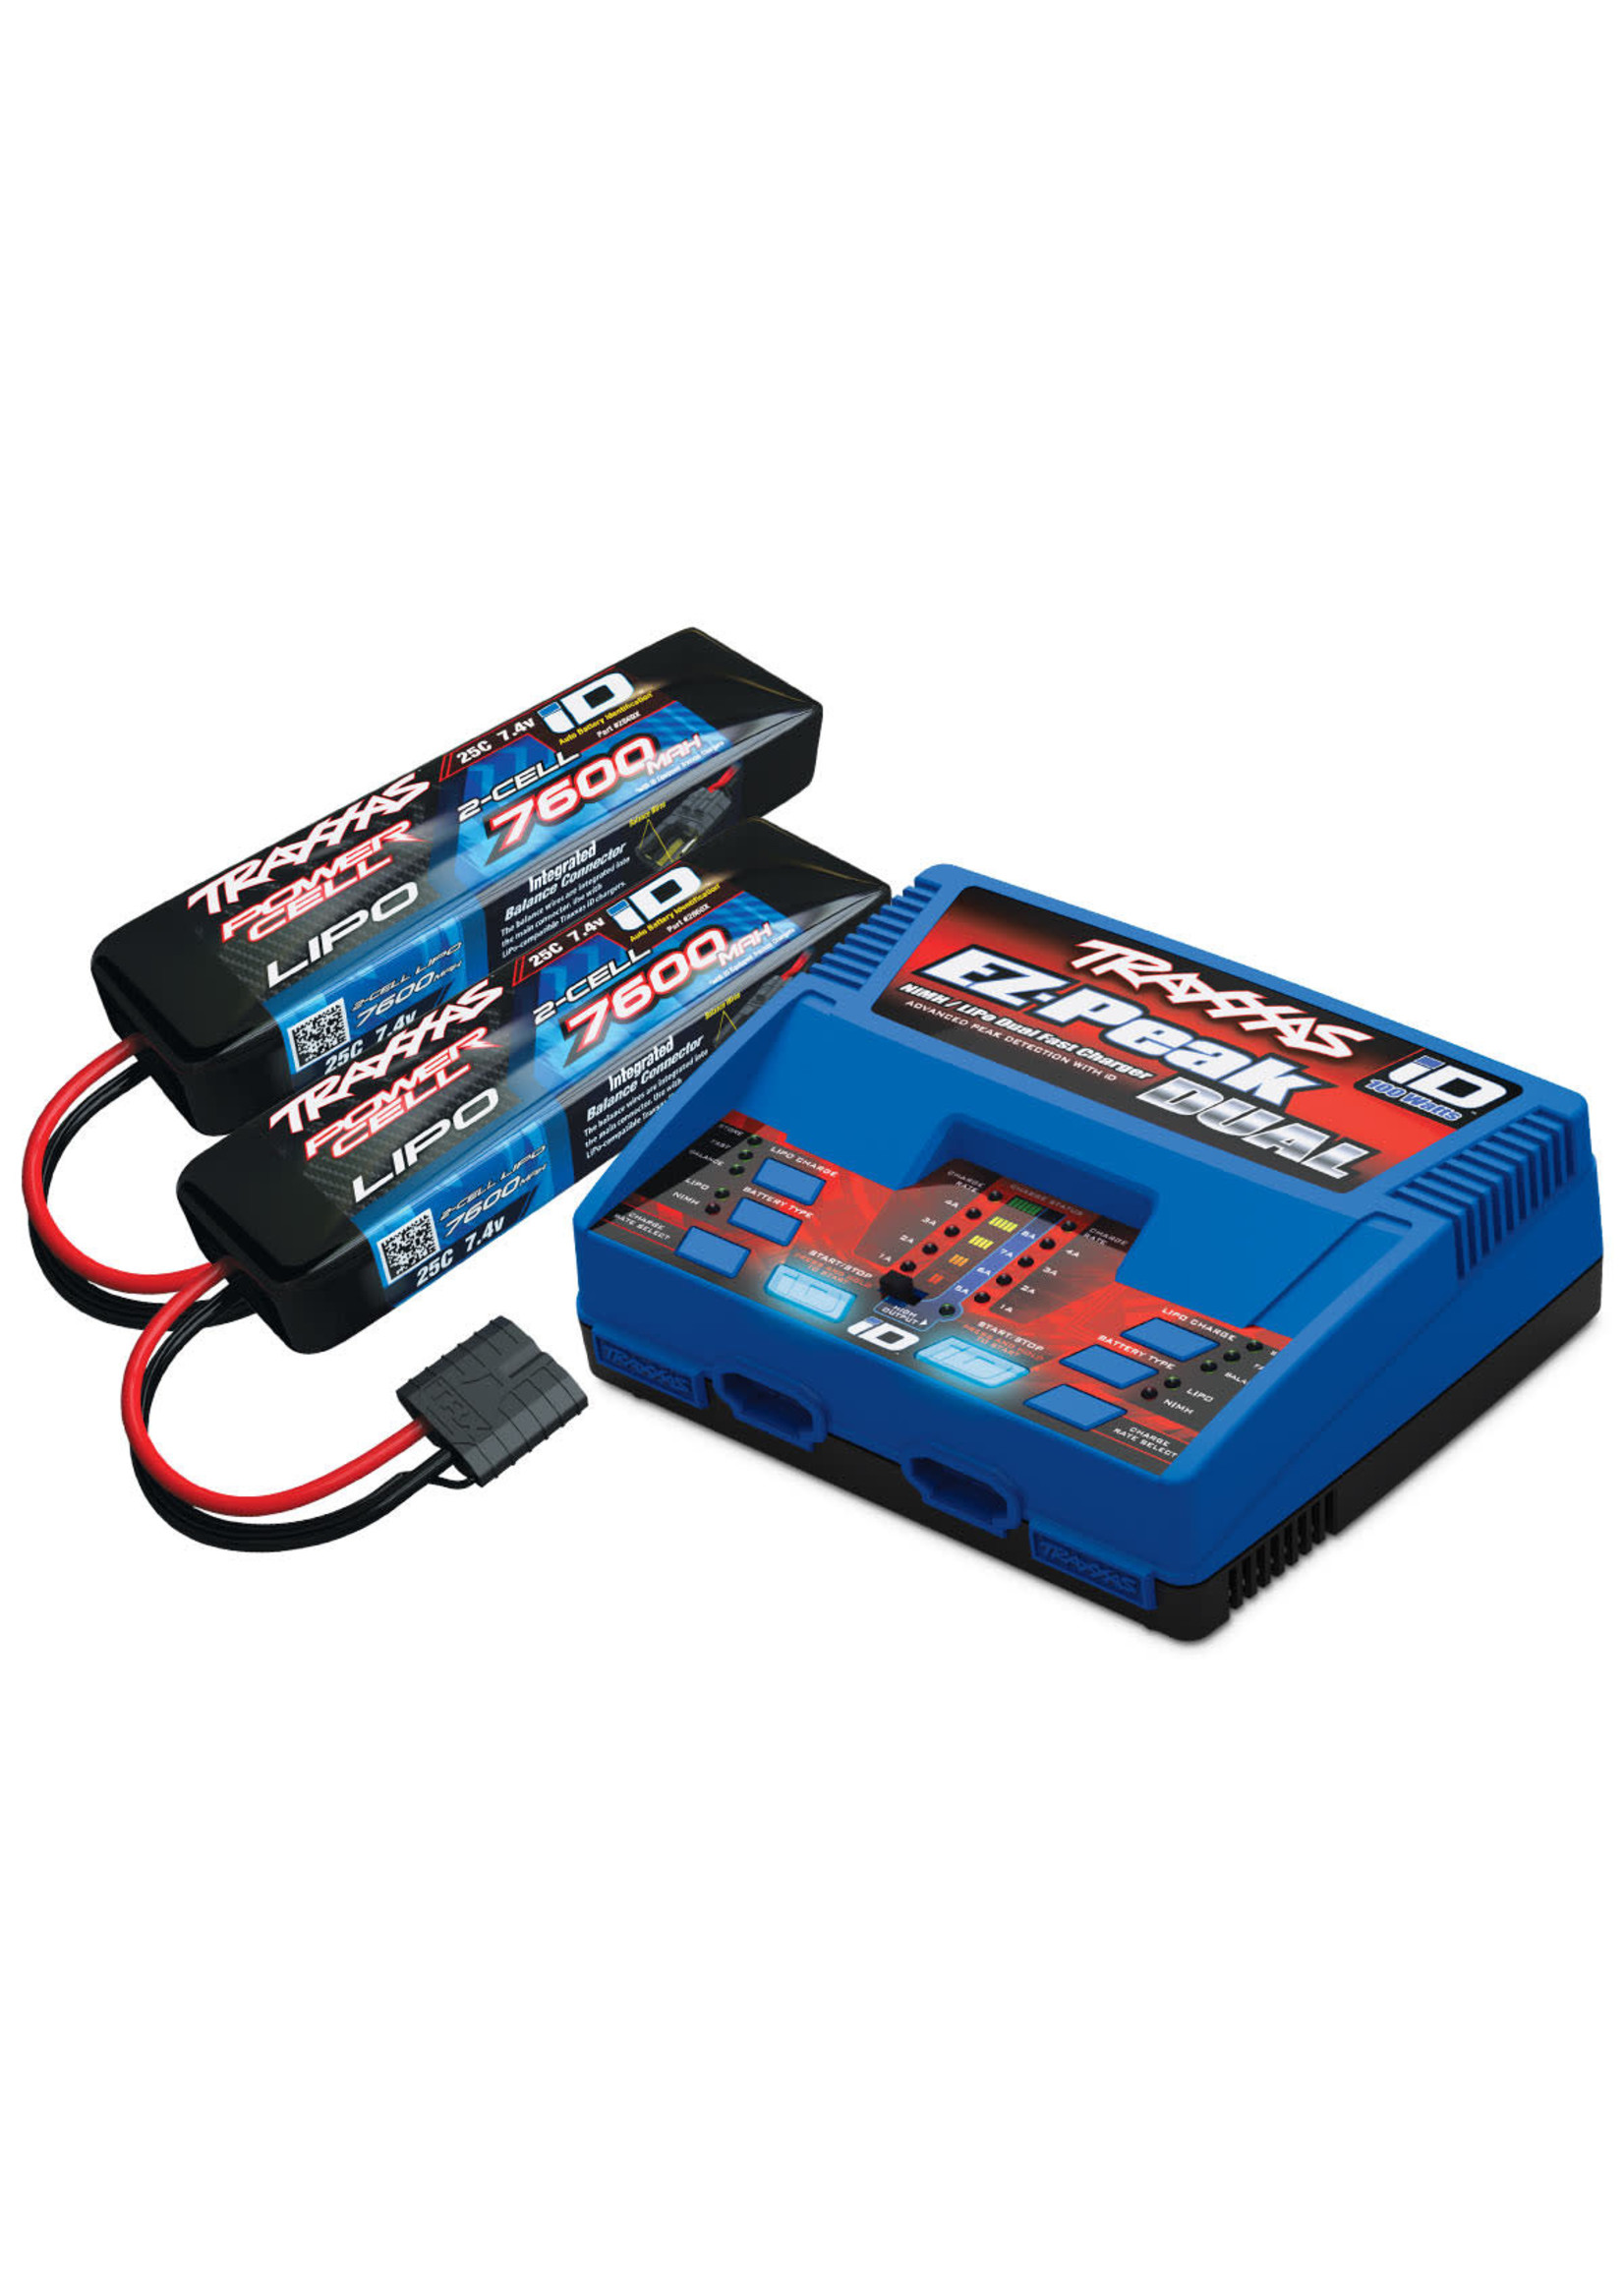 TRA2991 Traxxas Battery/Charger Completer Pack (Includes #2972